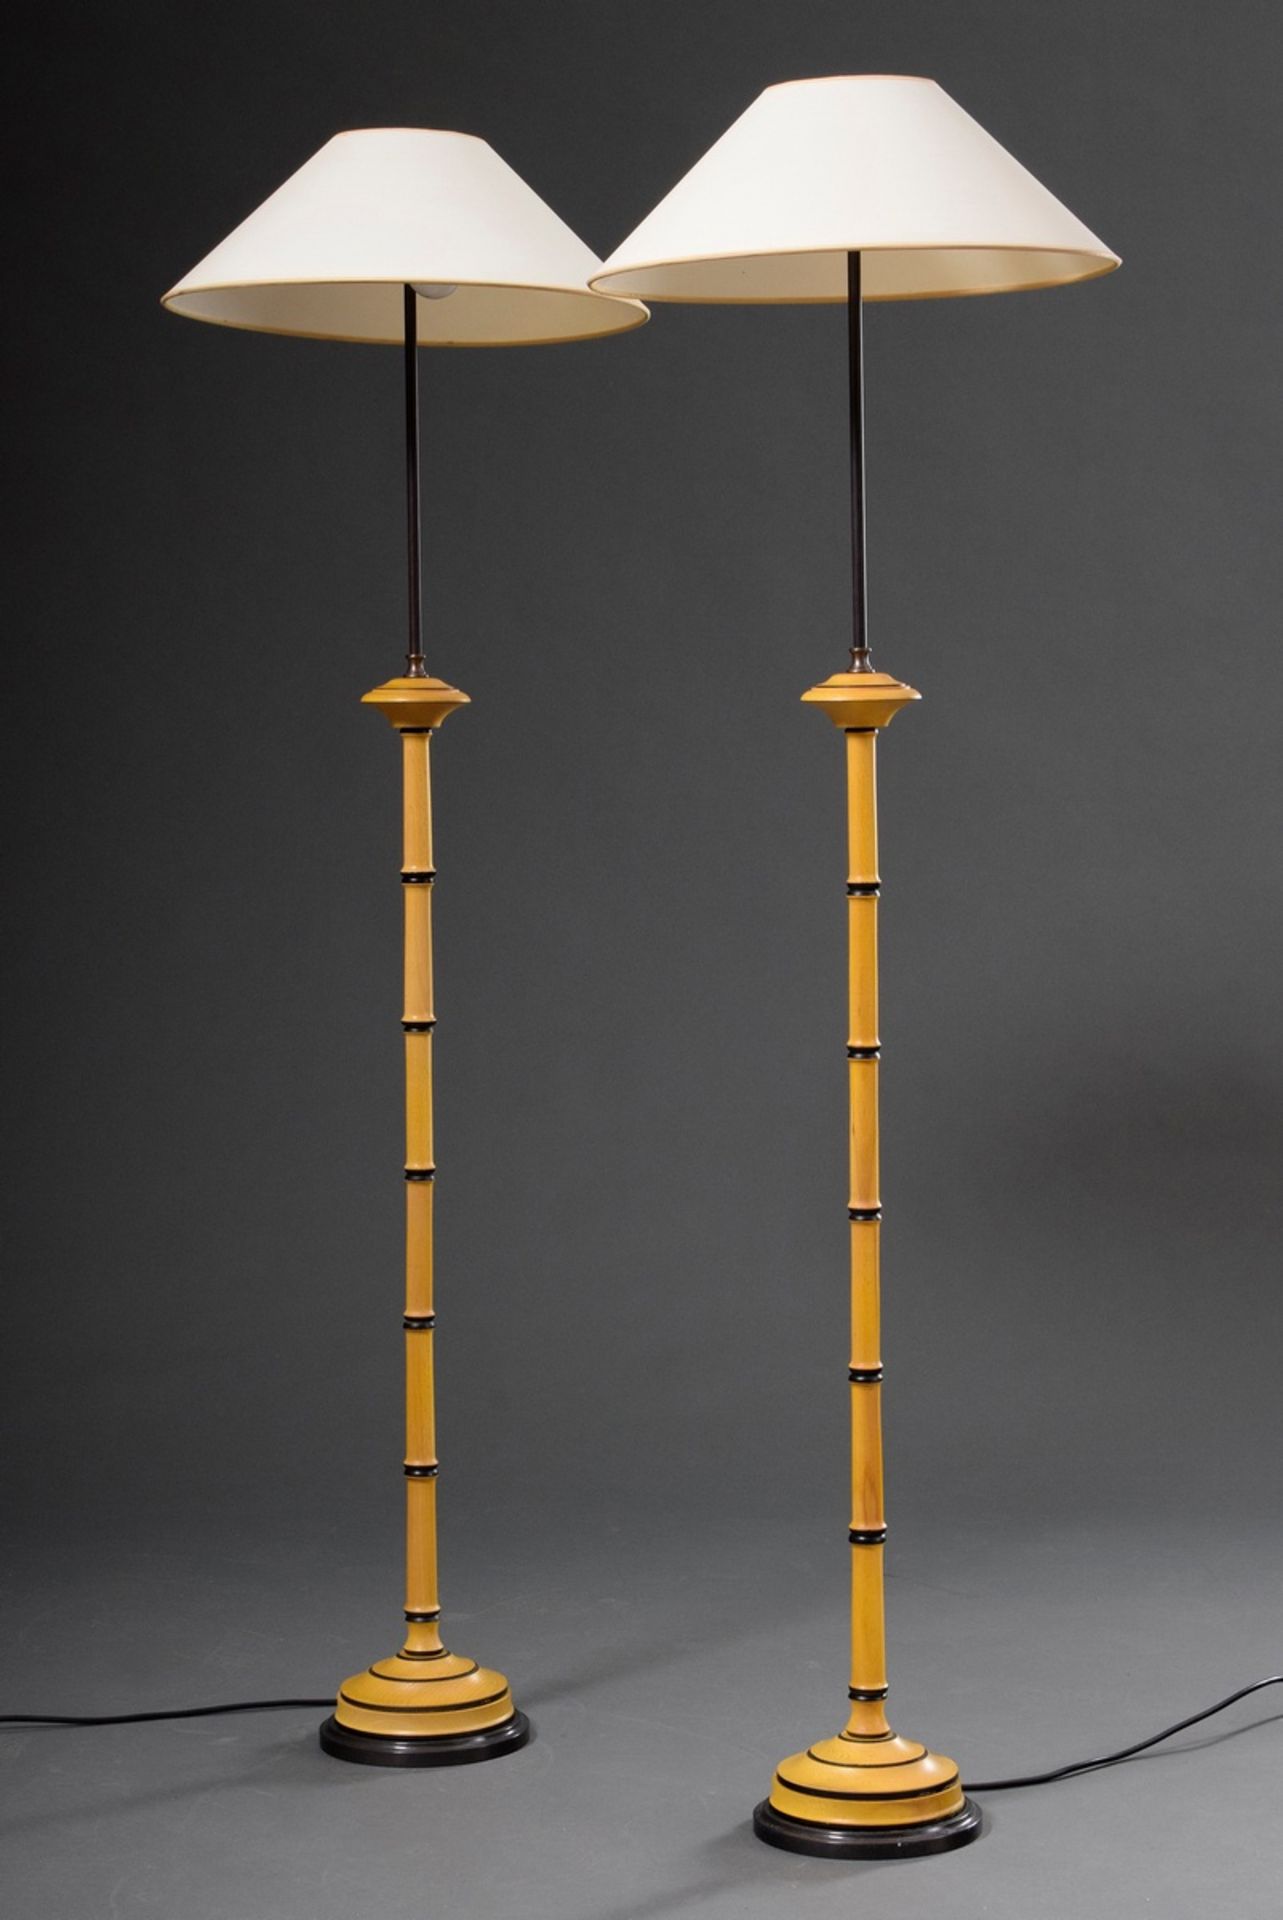 Pair of modern colonial style floor lamps with bamboo trompe-l'œil, wood/metal, h. 135cm